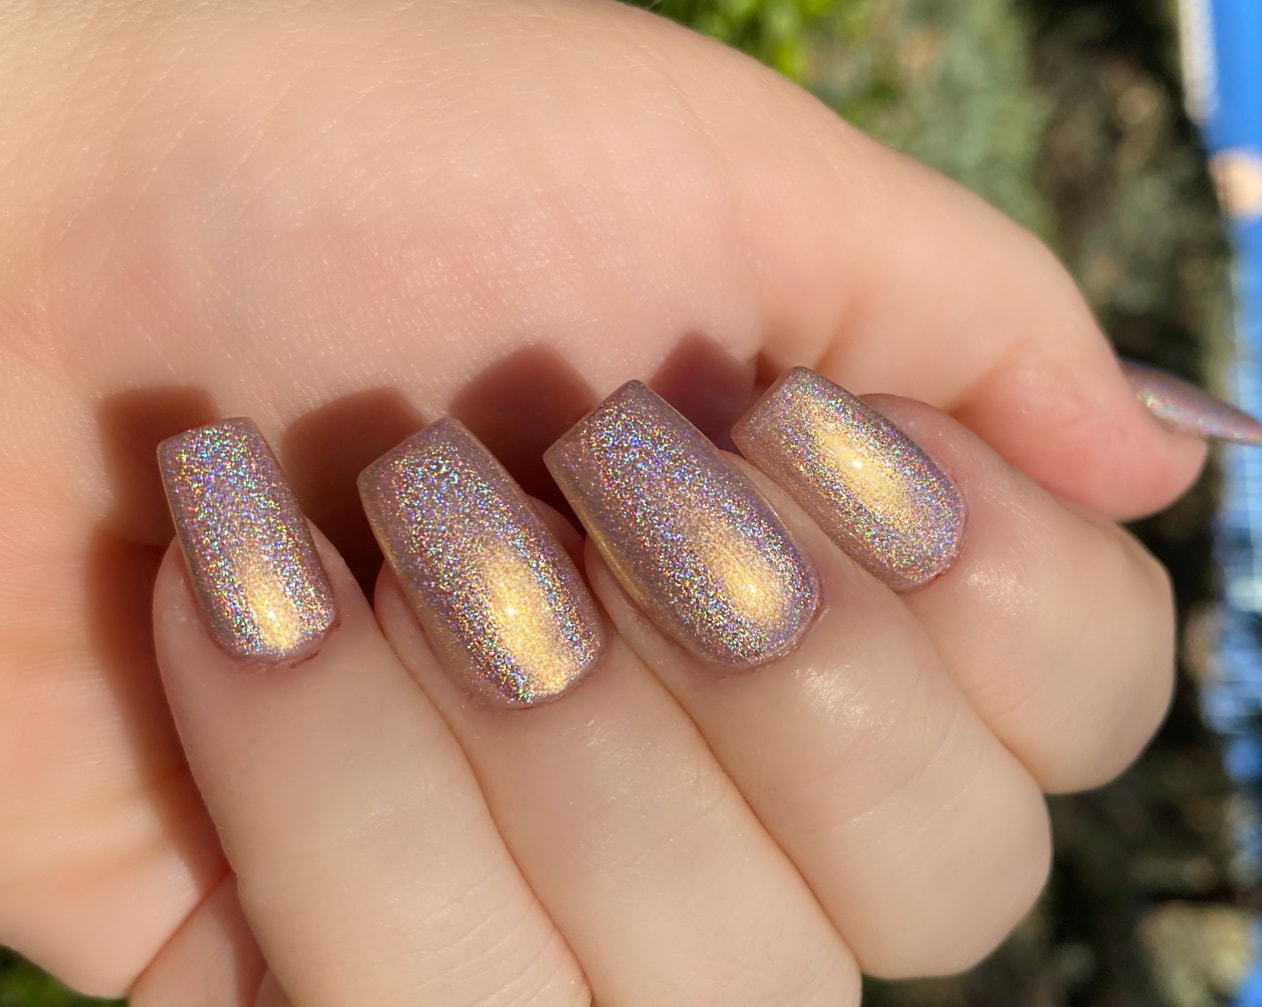 Acade Me Holographic Nail Art Tips and Tricks - wide 2